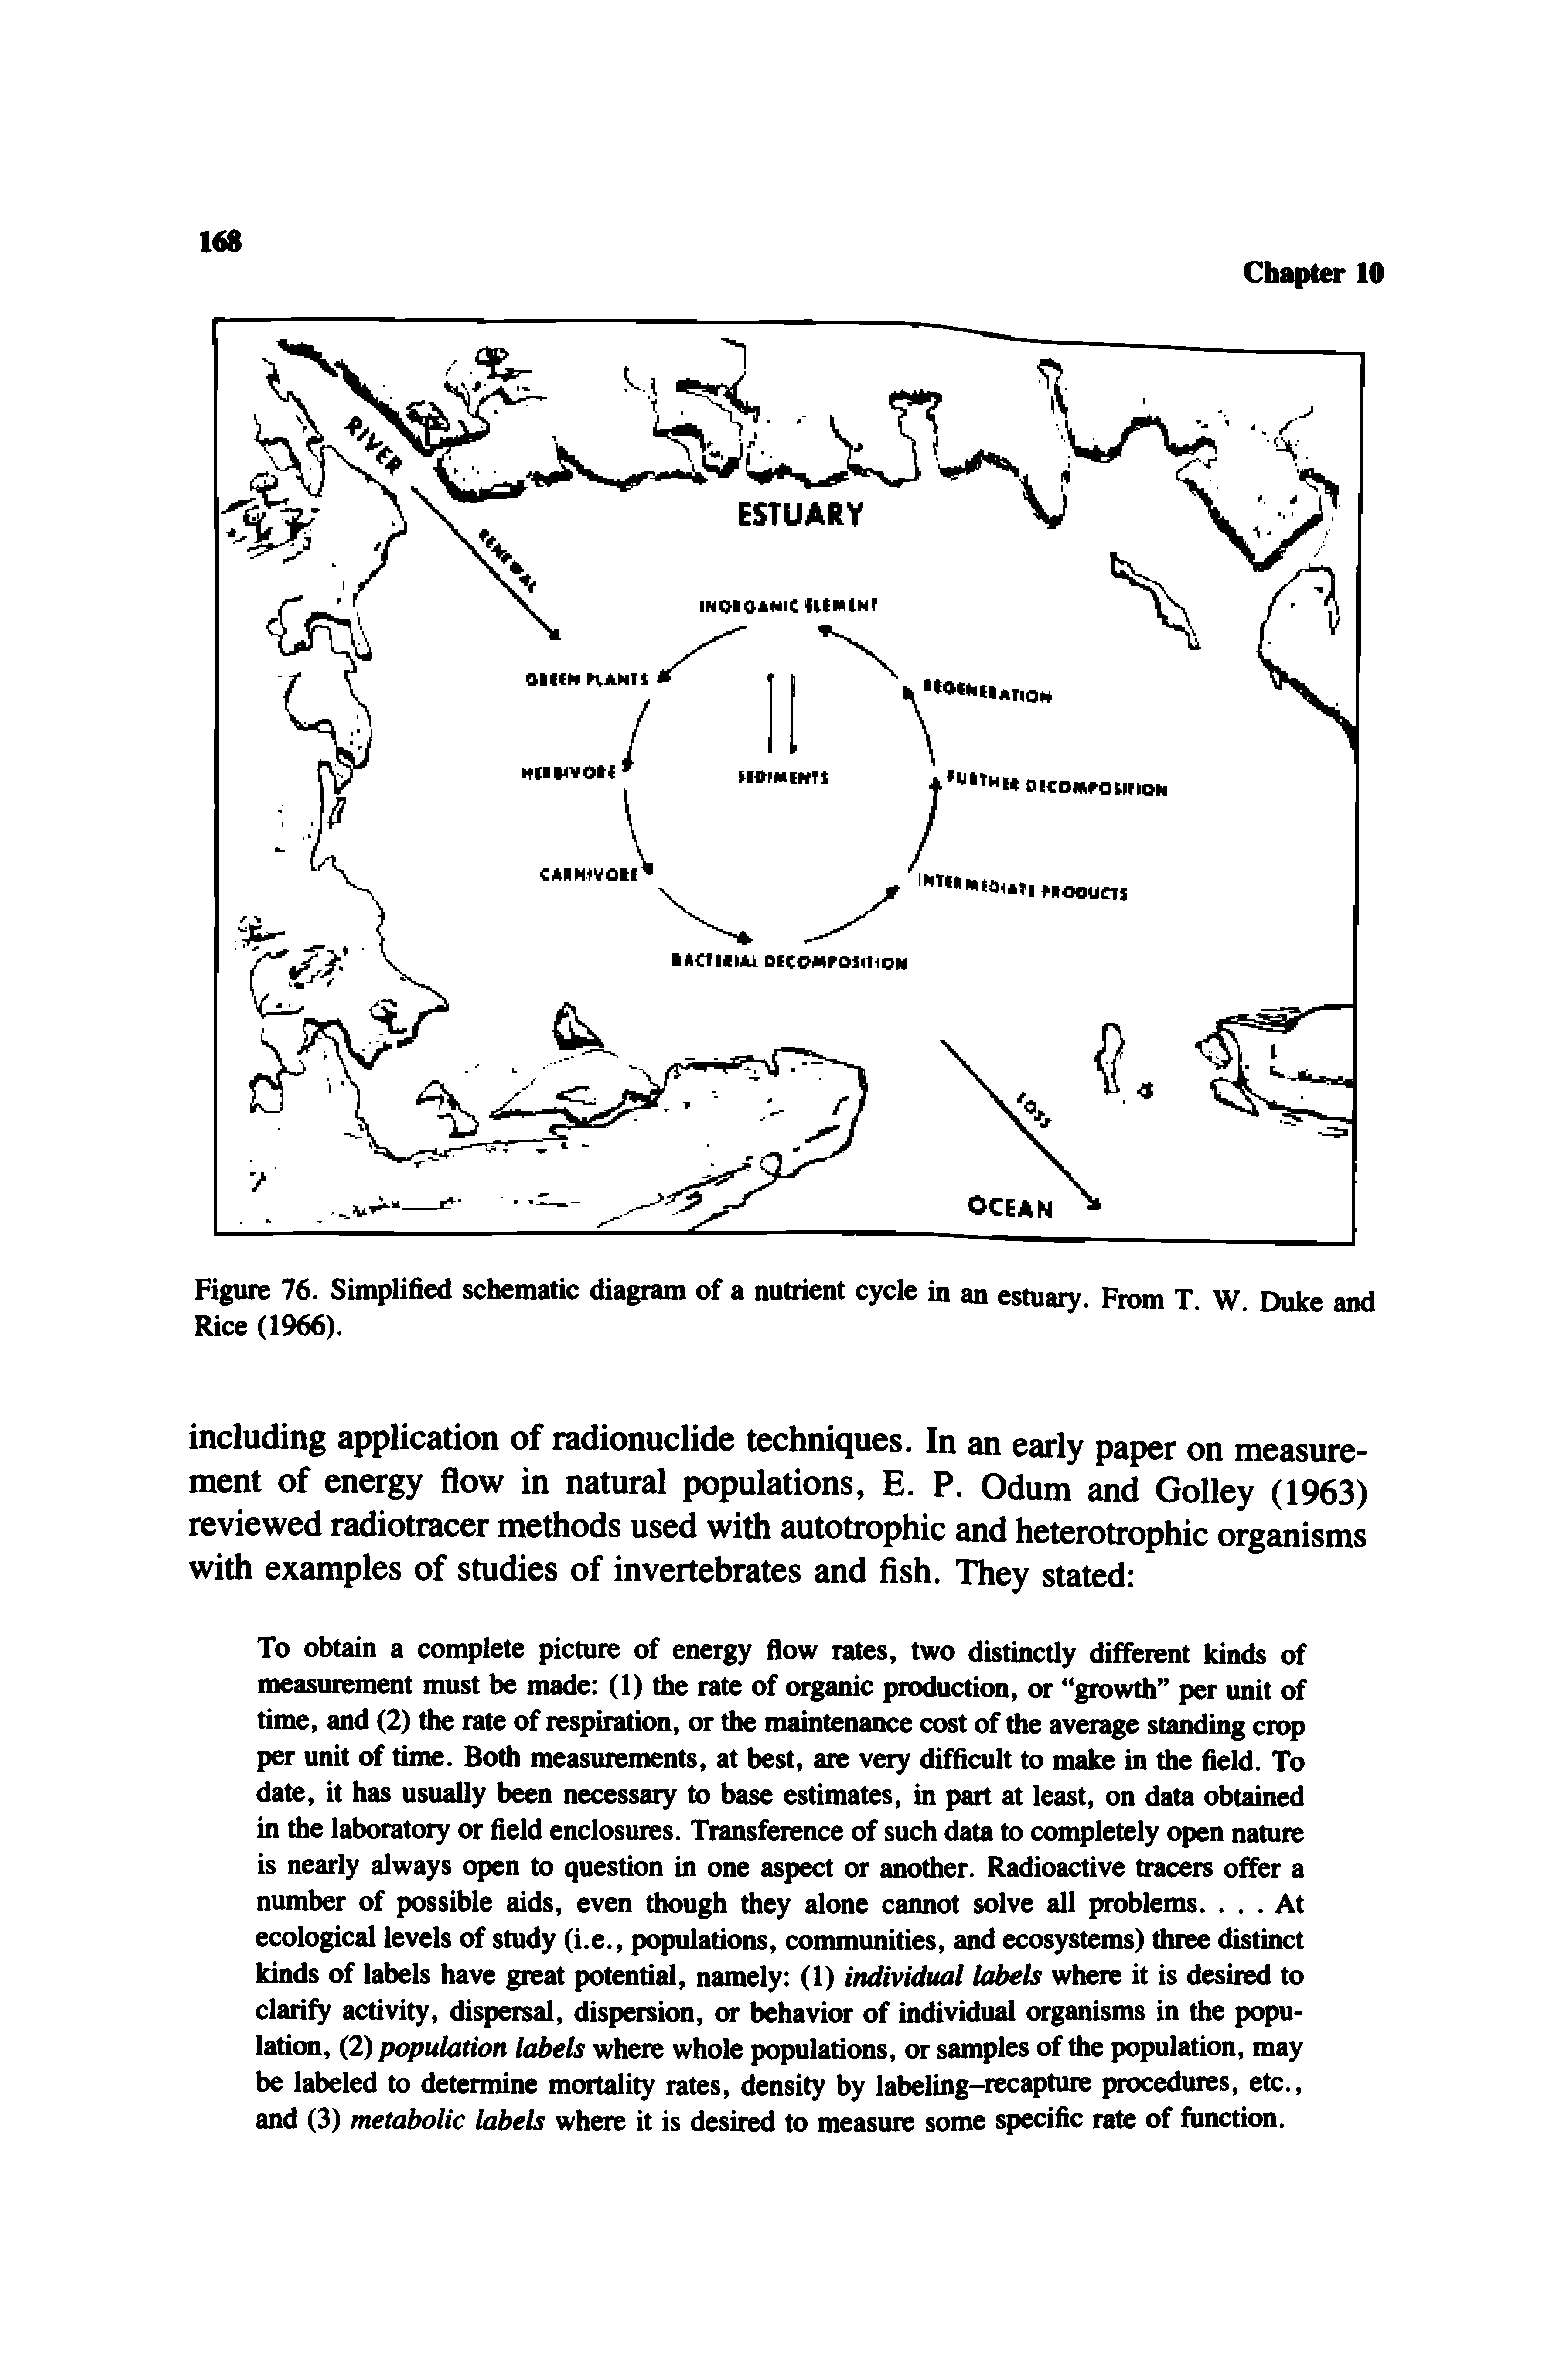 Figure 76. Simplified schematic diagram of a nutrient cycle in an estuary. From T. W. Duke and Rice (1966).